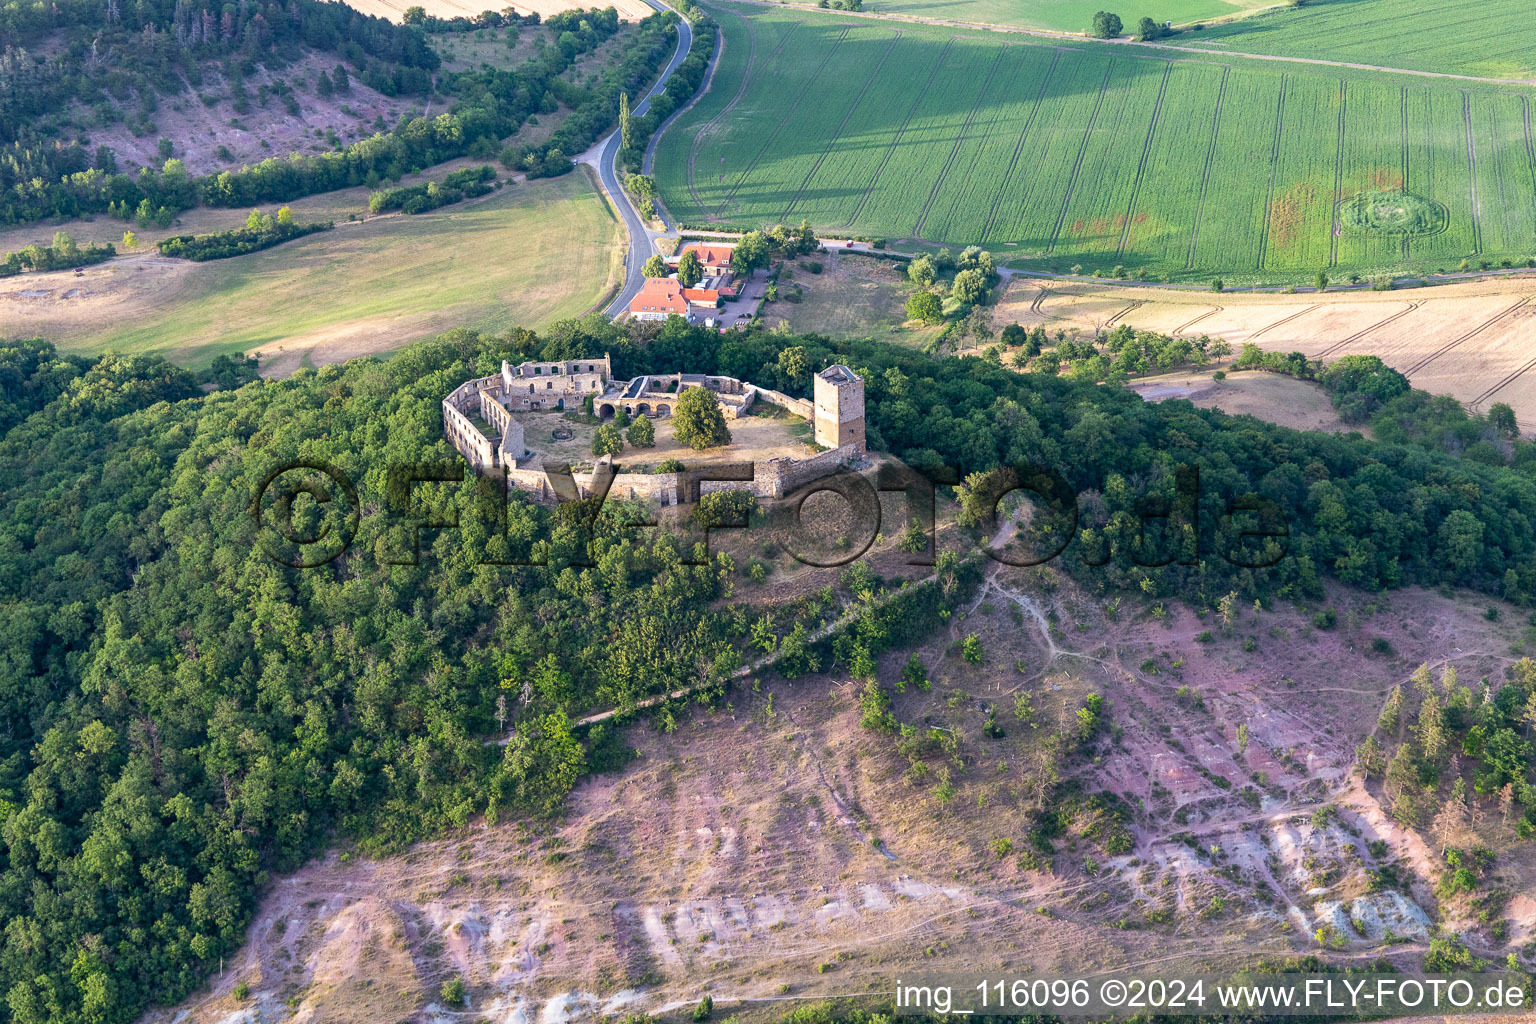 Ruins and vestiges of the former castle and fortress Burg Gleichen on Thomas-Muentzer-Strasse in the district Wandersleben in Drei Gleichen in the state Thuringia, Germany from above